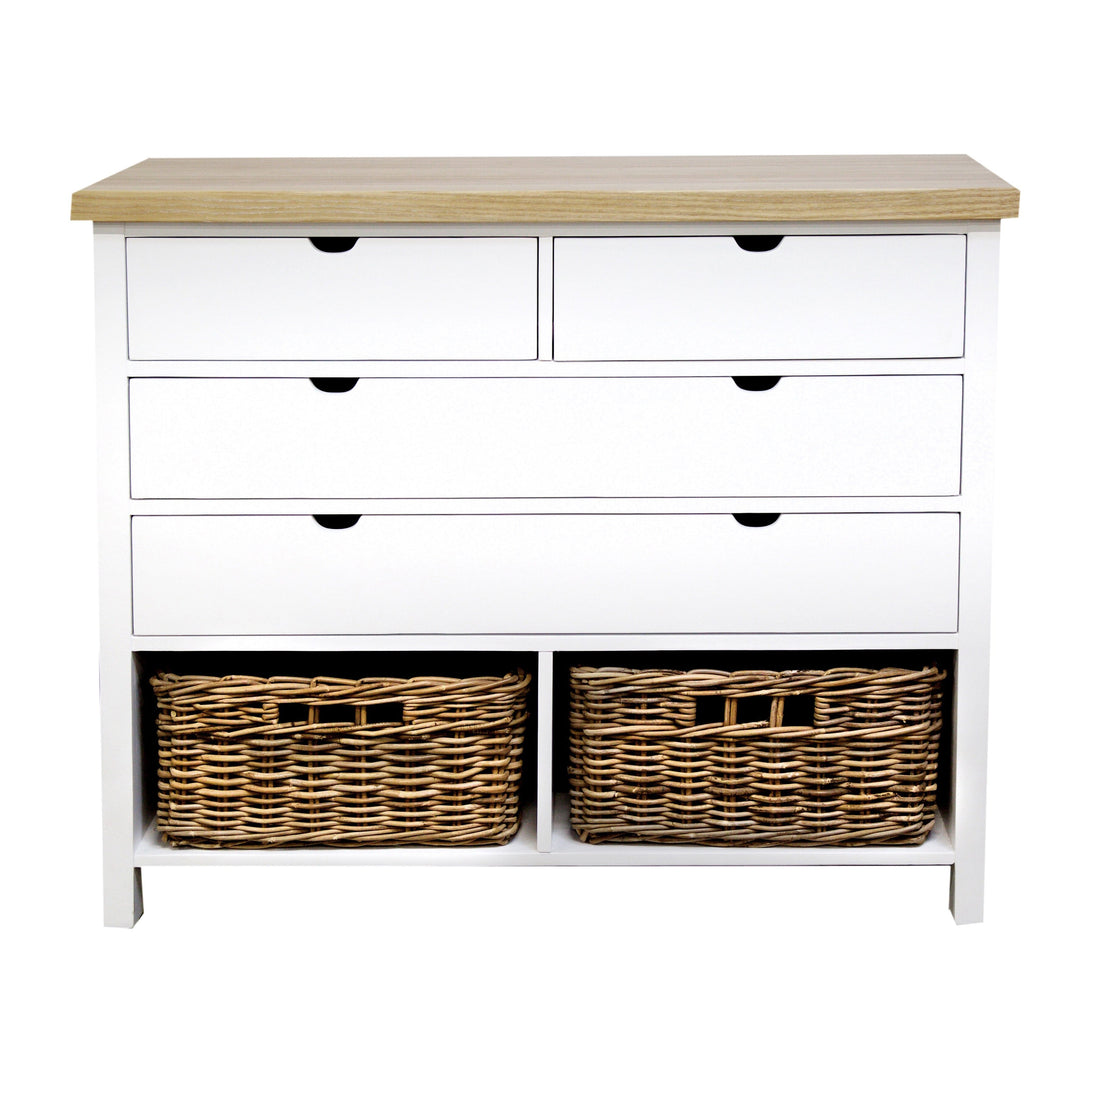 Newport Chest of Drawers L1140mm Bedroom Furniture Beachwood Designs White &amp; Limed Ash 